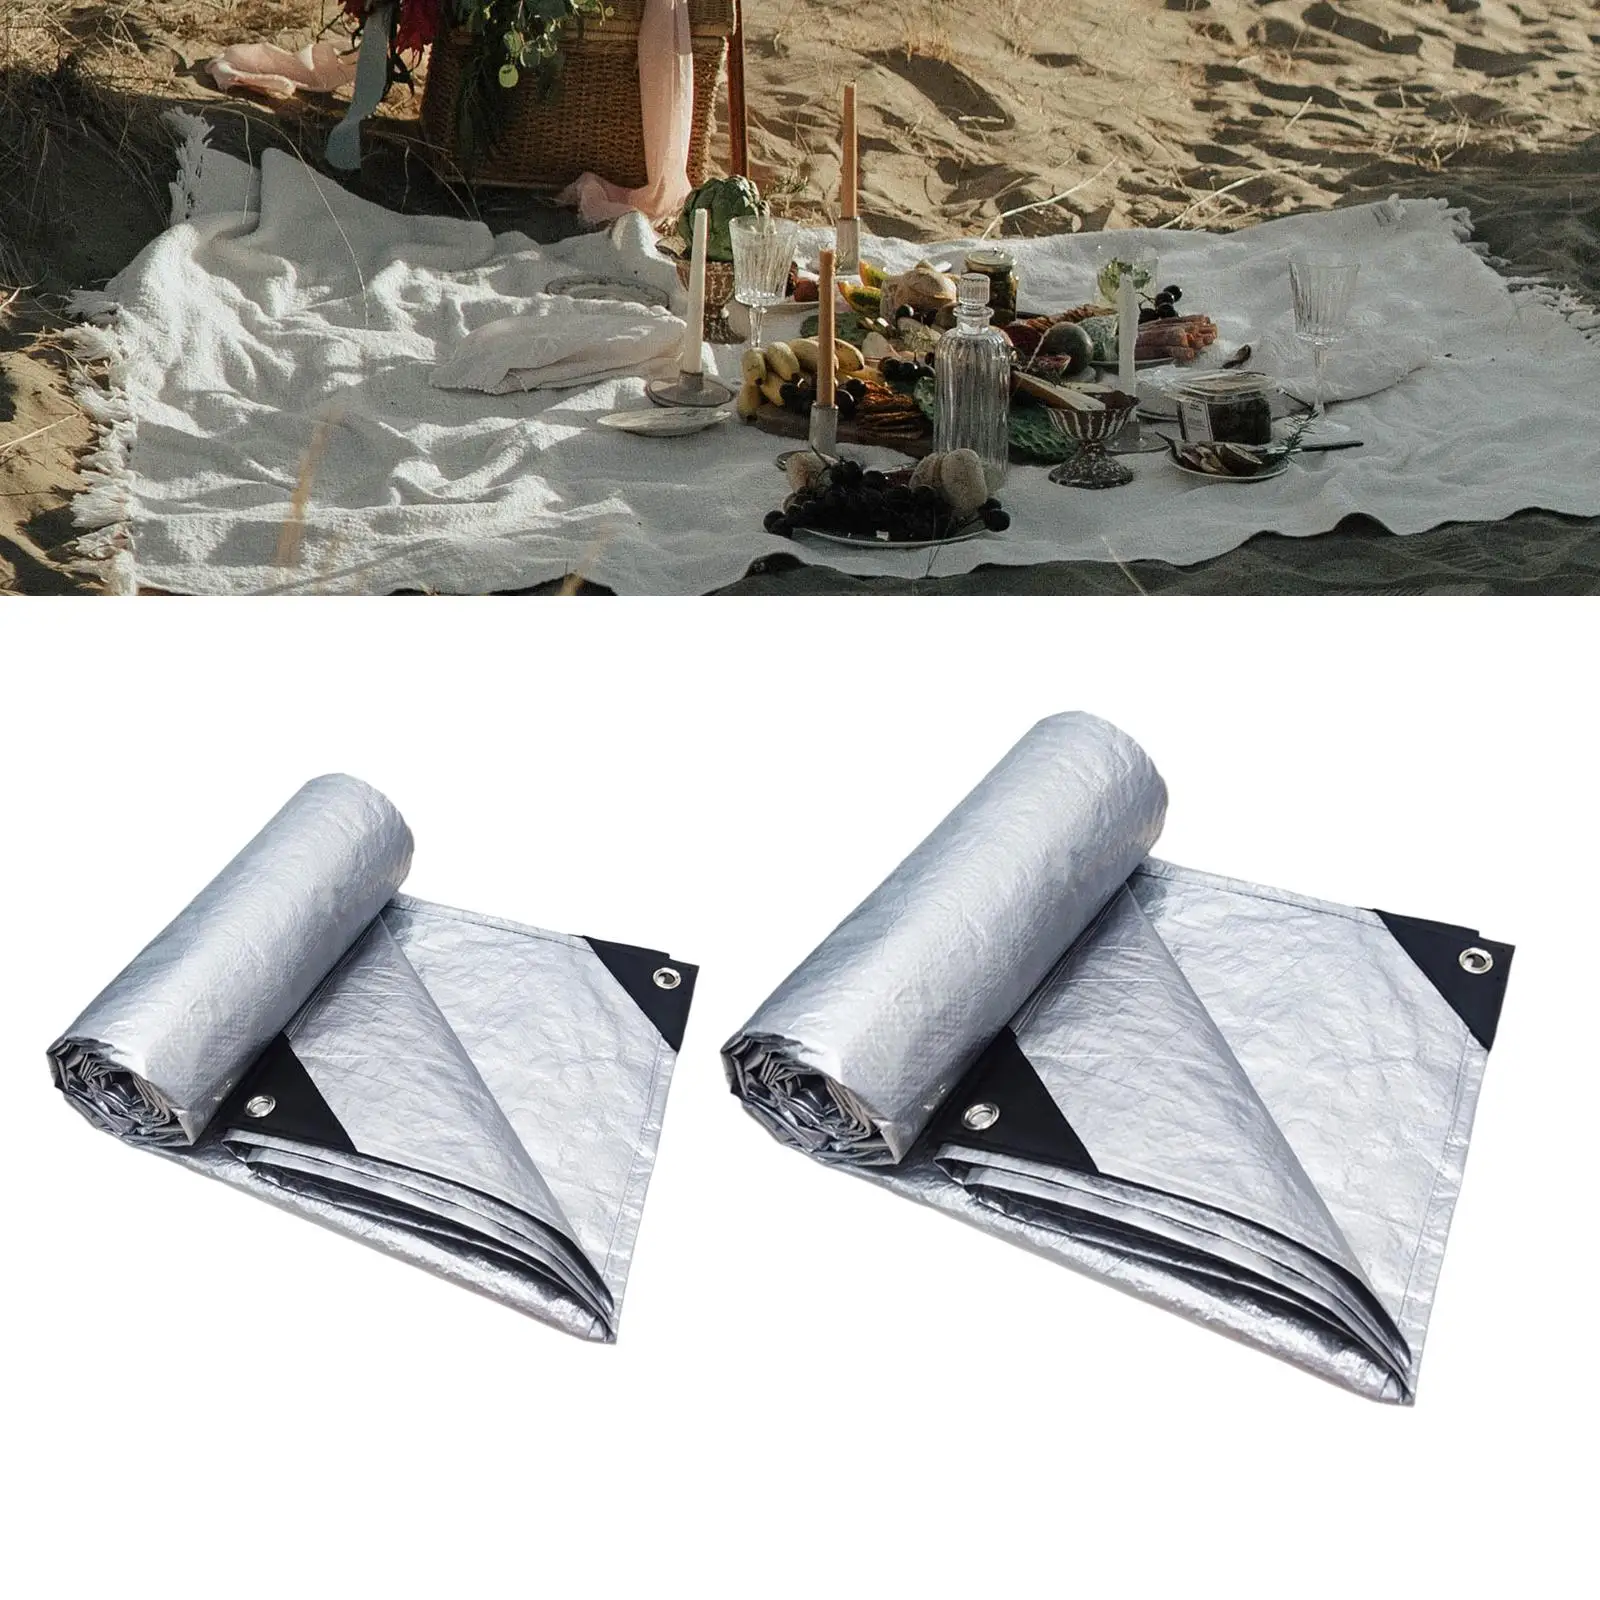 Picnic Outdoor Blanket Large Folding Lightweight Sandproof Lawn Blanket Camping Blanket for Park Beach Travel Activities Hiking